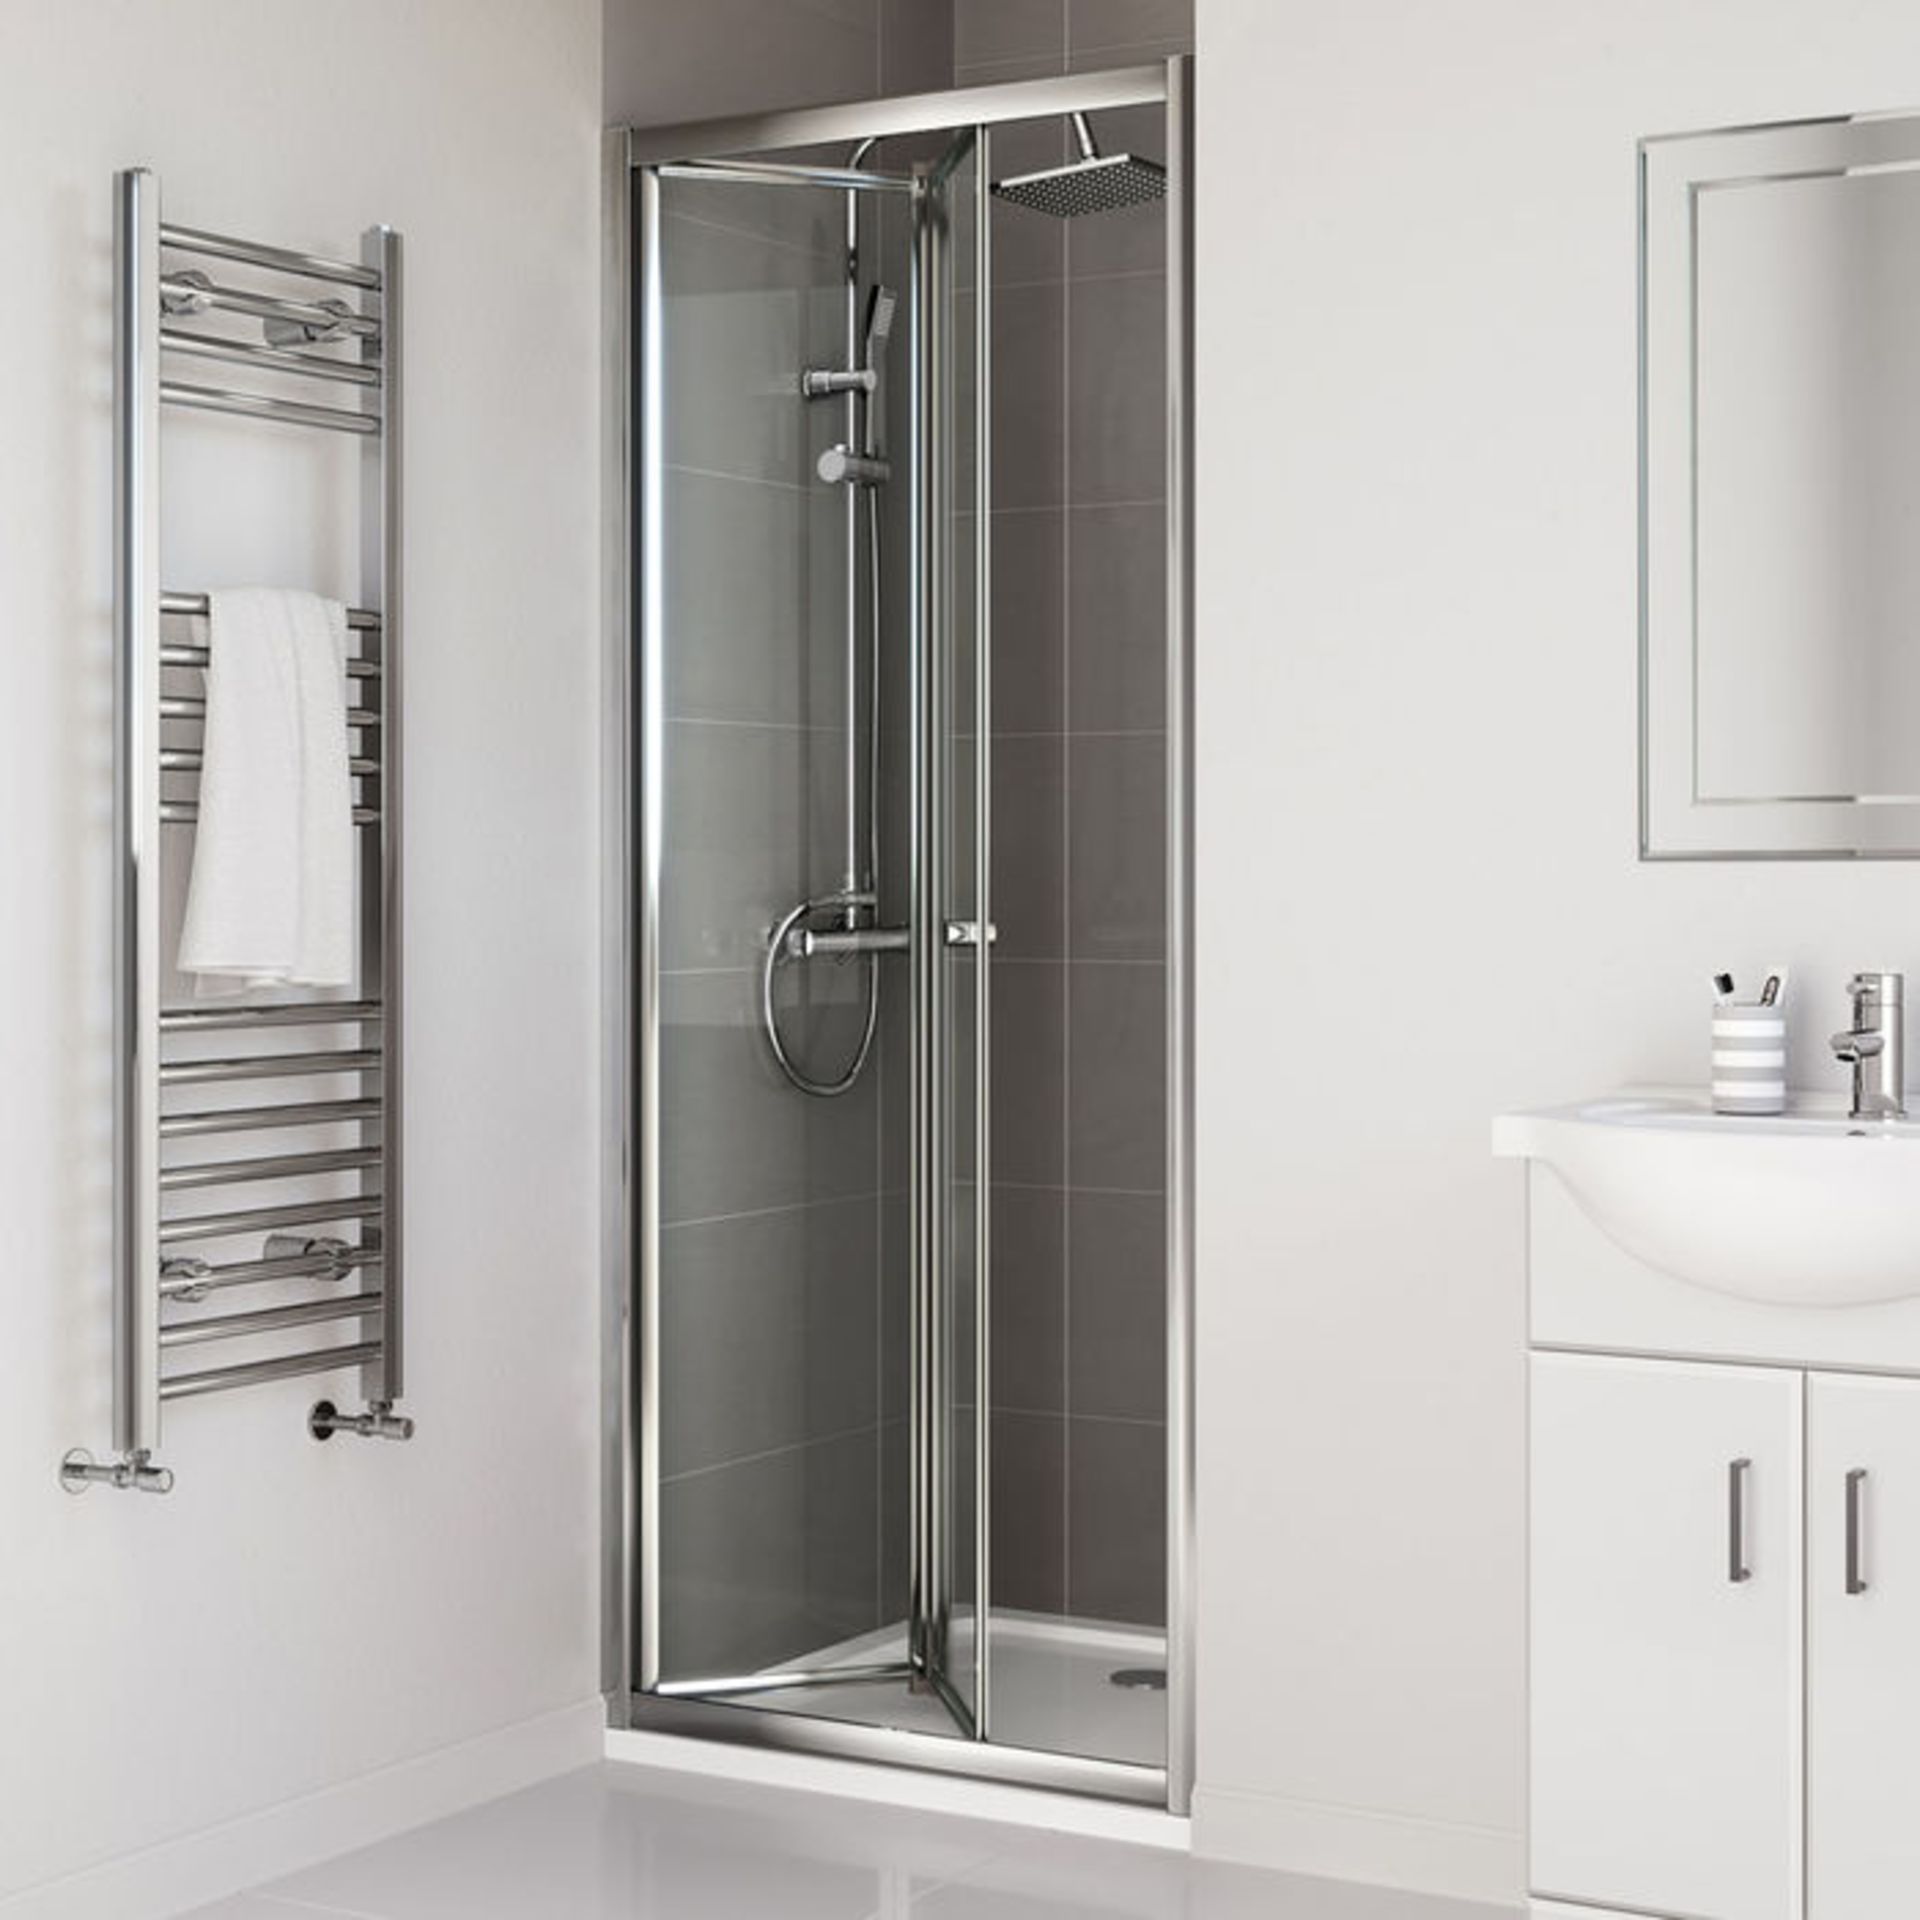 New (P37) 800mm - Elements Bi Fold Shower Door. Rrp £299.99. 4mm Safety Glass Fully Waterproof... - Image 2 of 3